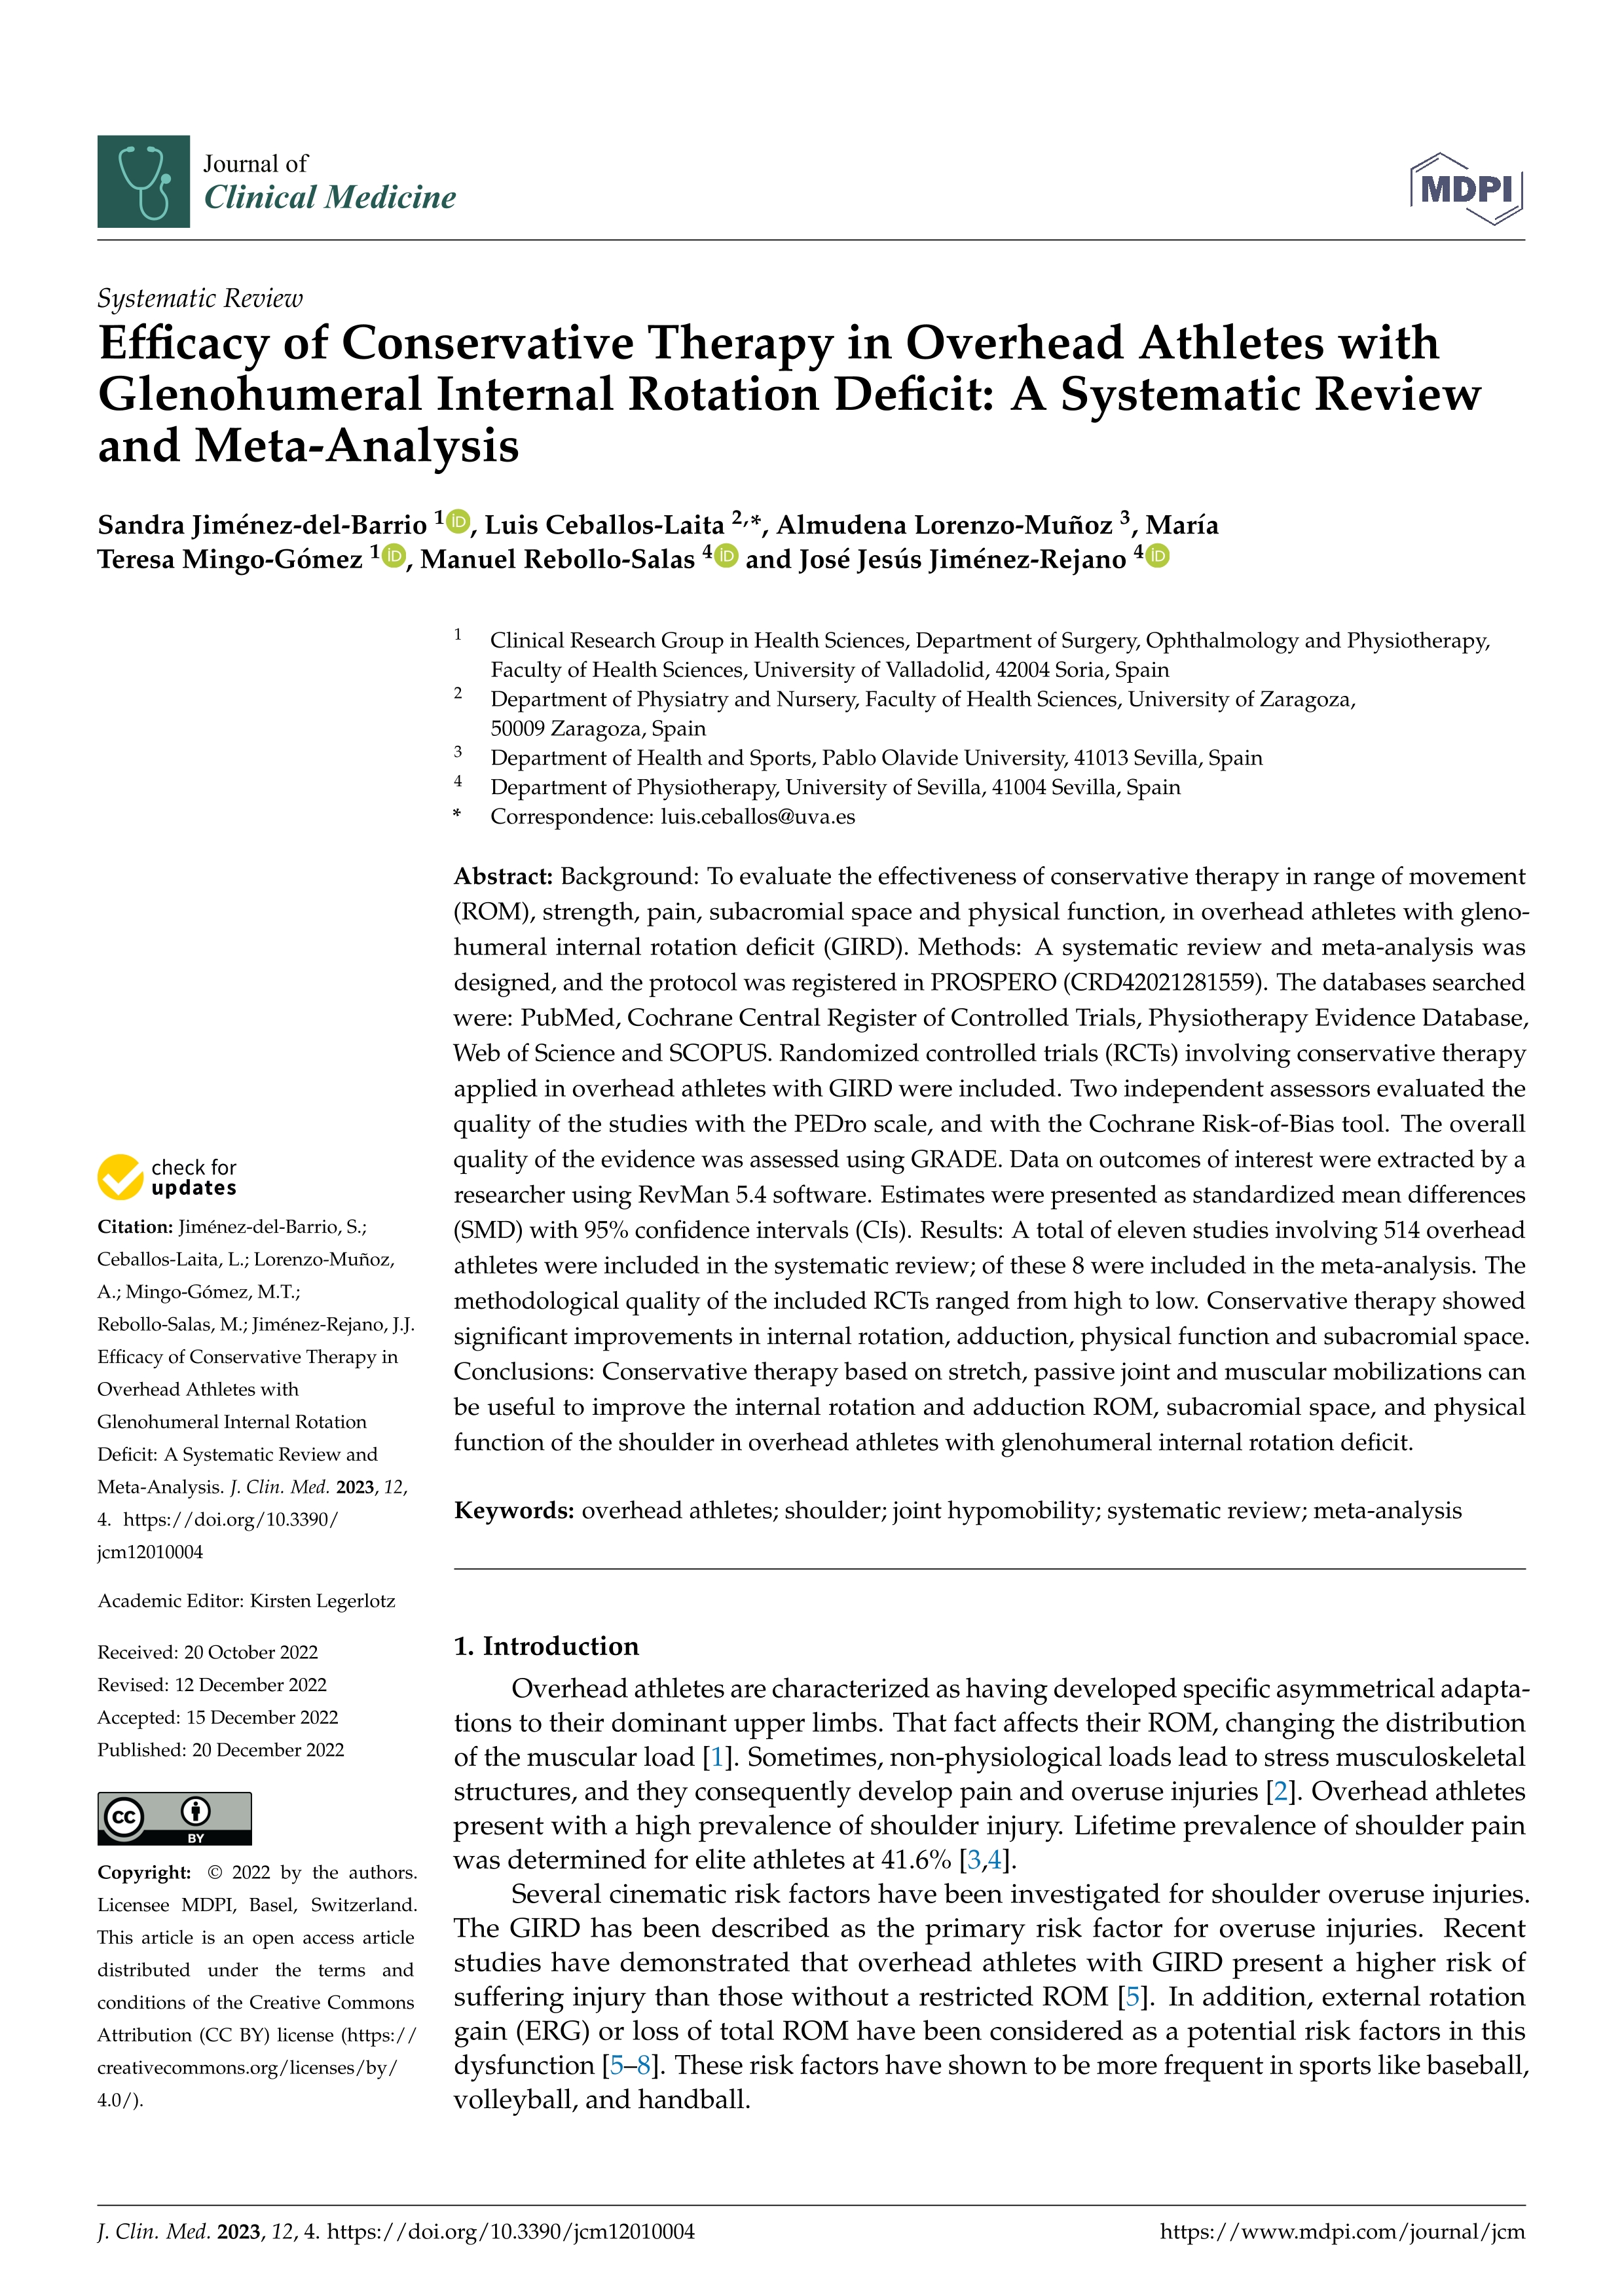 Efficacy of conservative therapy in overhead athletes with glenohumeral internal rotation deficit: a systematic review and meta-analysis